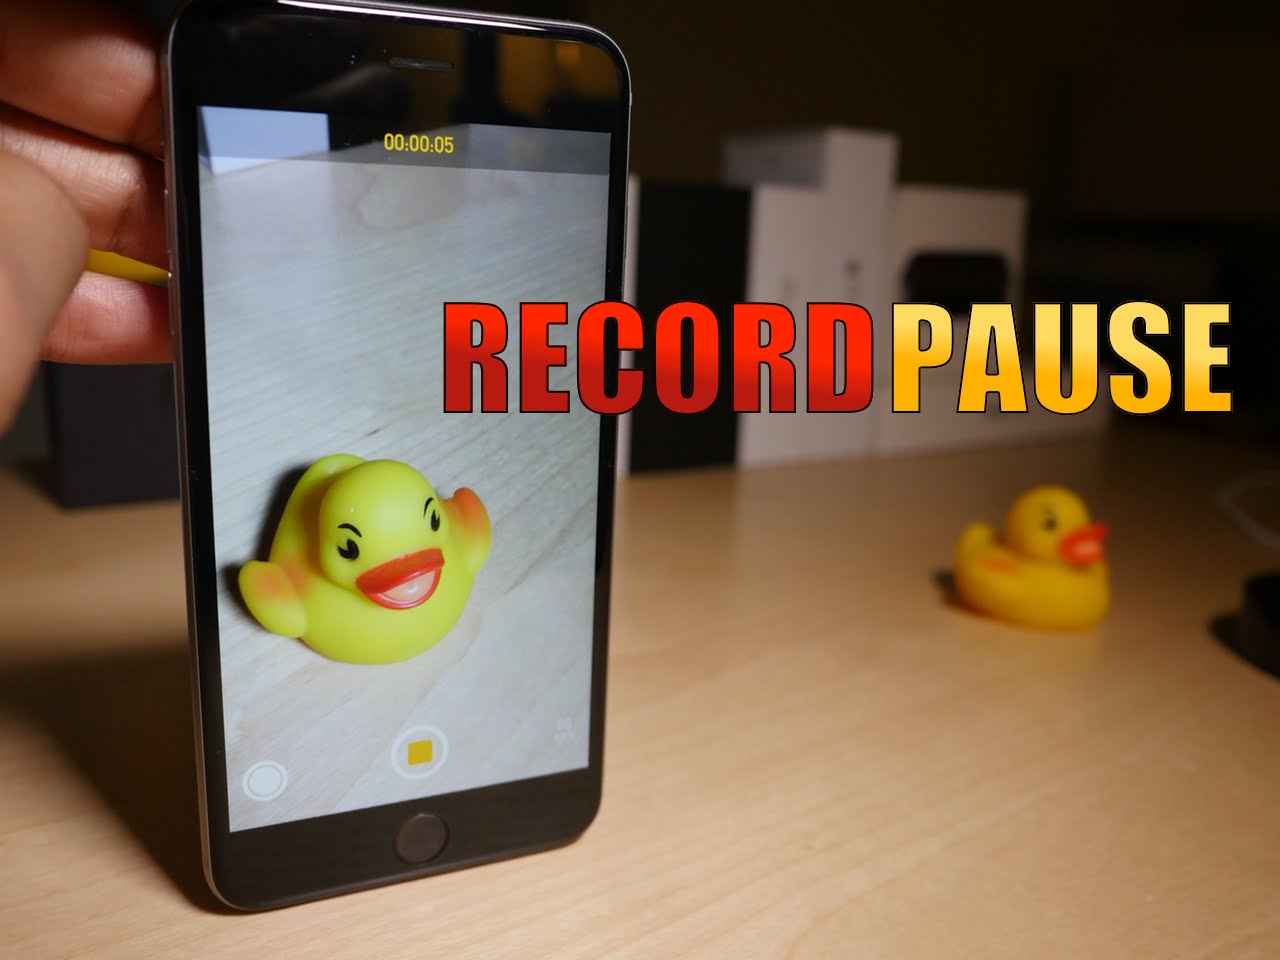 recordpause lets you pause and resume video recording in the stock camera app